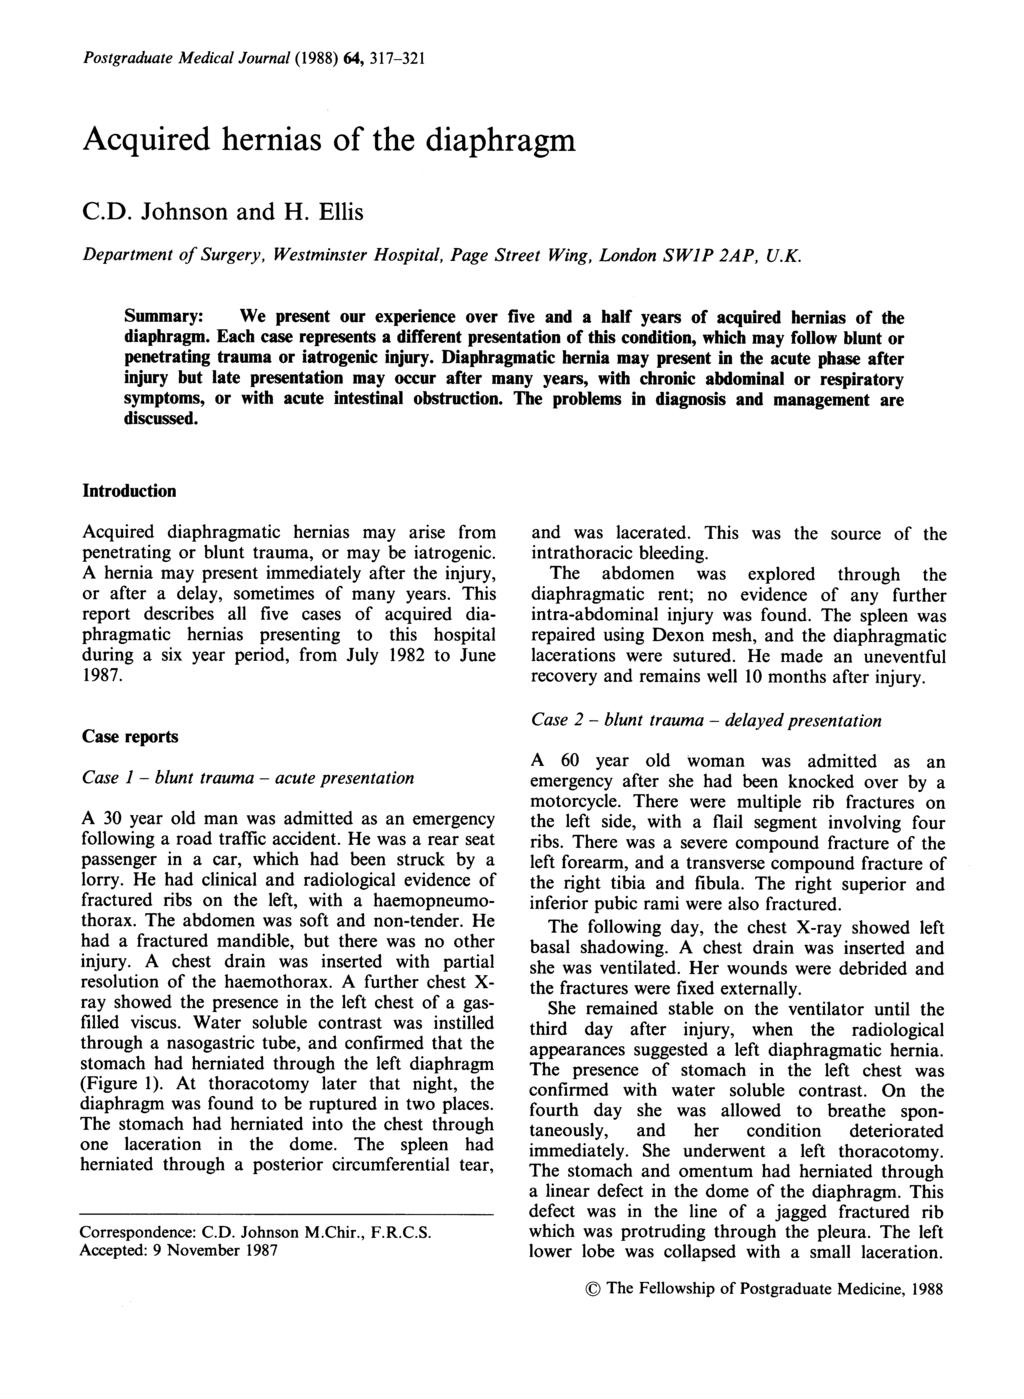 Postgraduate Medical Journal (1988) 64, 317-321 Acquired hernias of the diaphragm C.D. Johnson and H. Ellis Department of Surgery, Westminster Hospital, Page Street Wing, London SWIP 2AP, U.K.